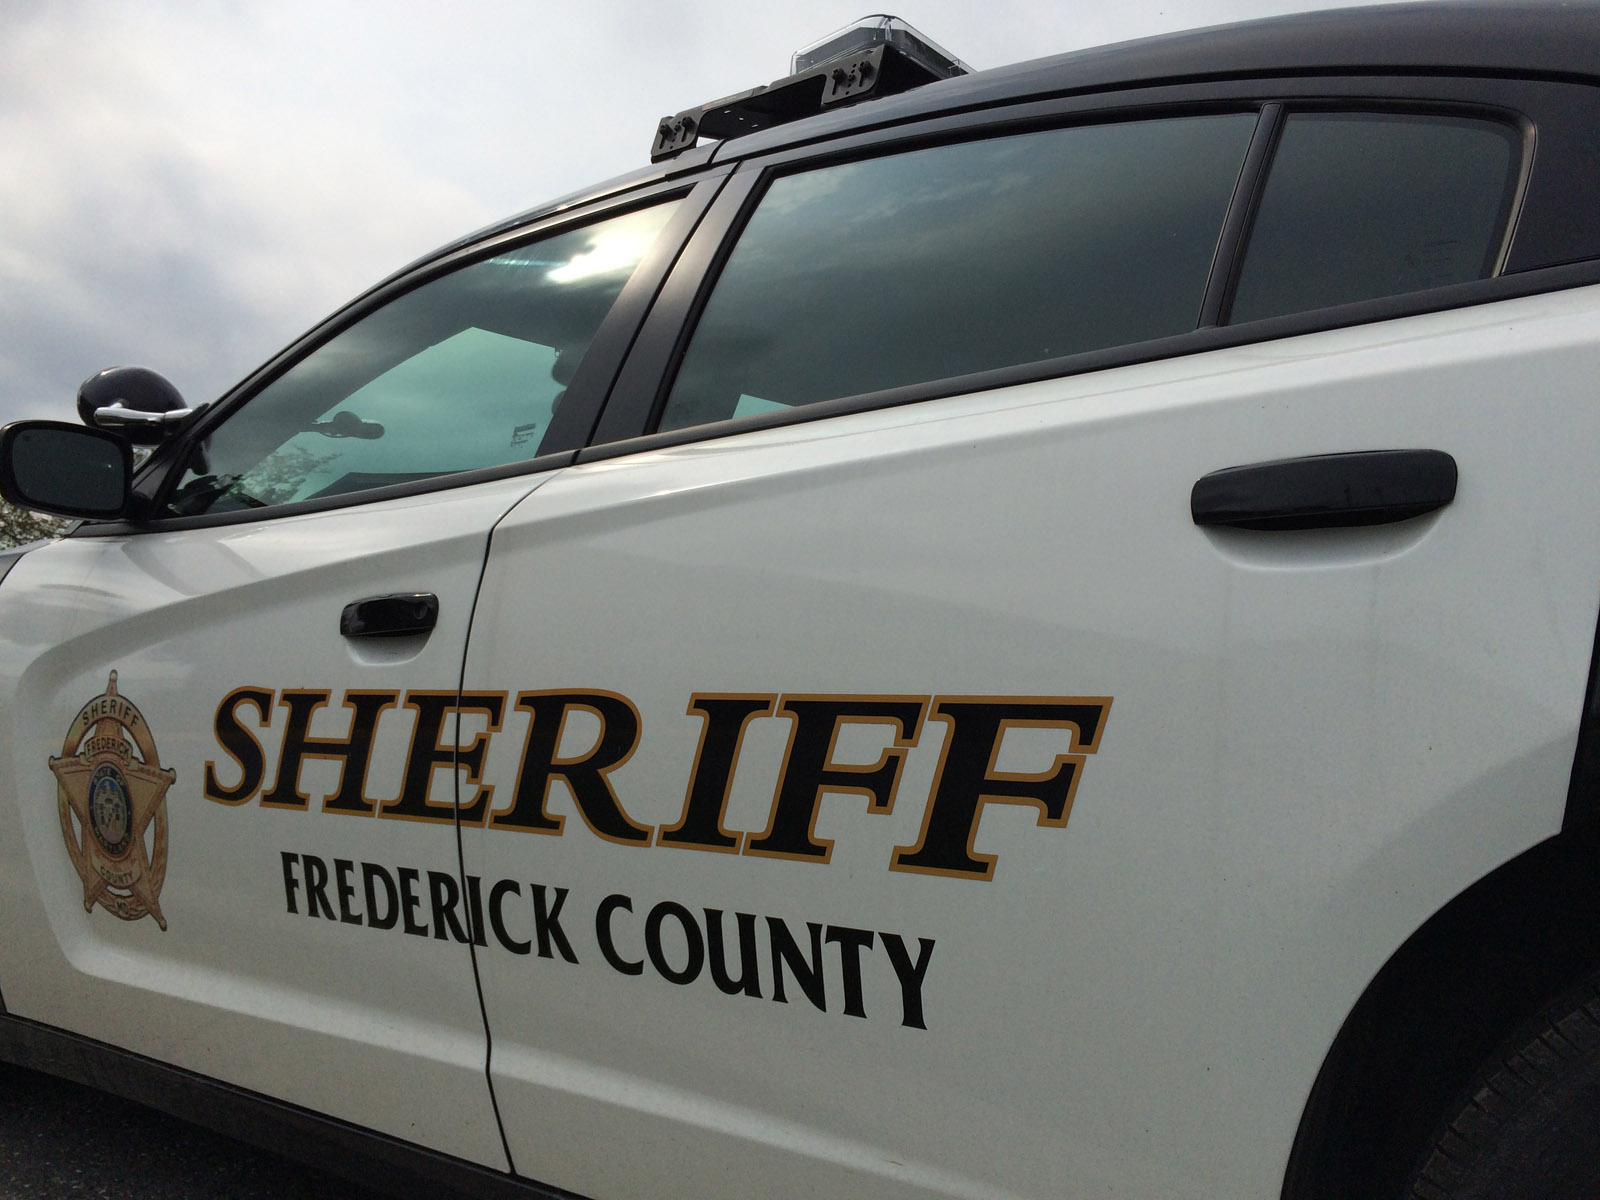 Gun dealer indicted with Frederick Co. sheriff claims ‘political vindictiveness’